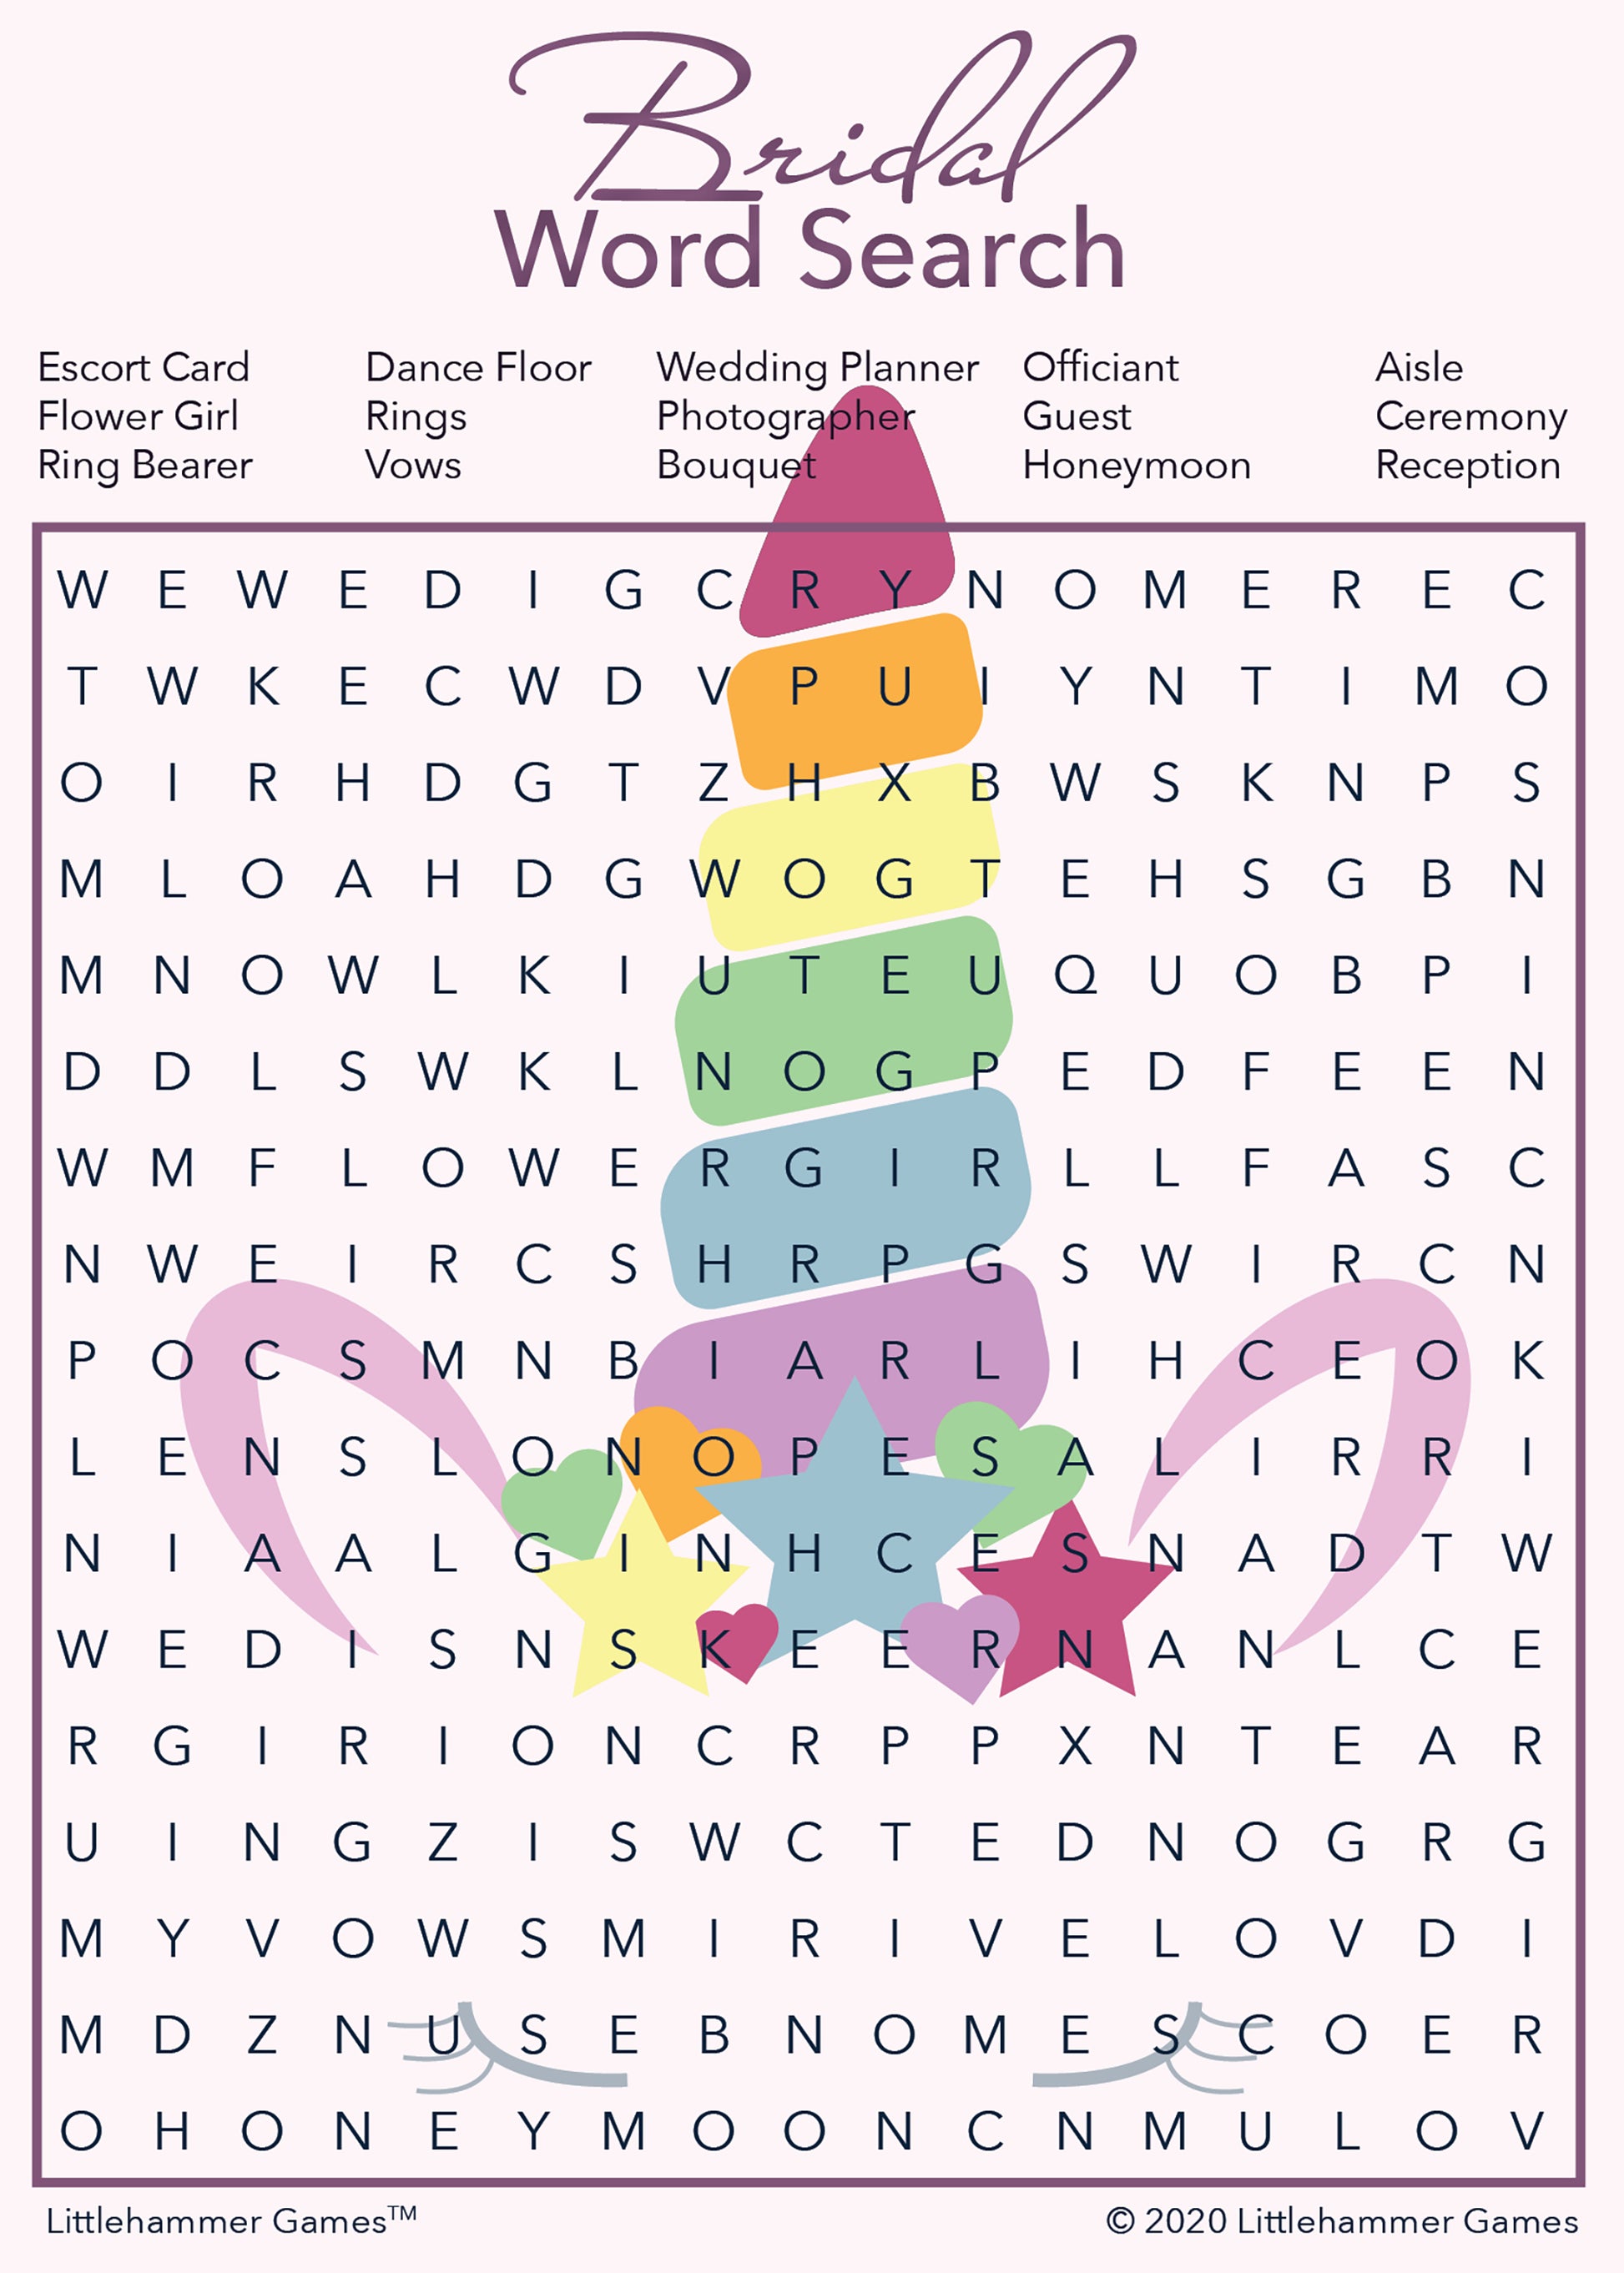 Bridal Word Search game card with a unicorn background